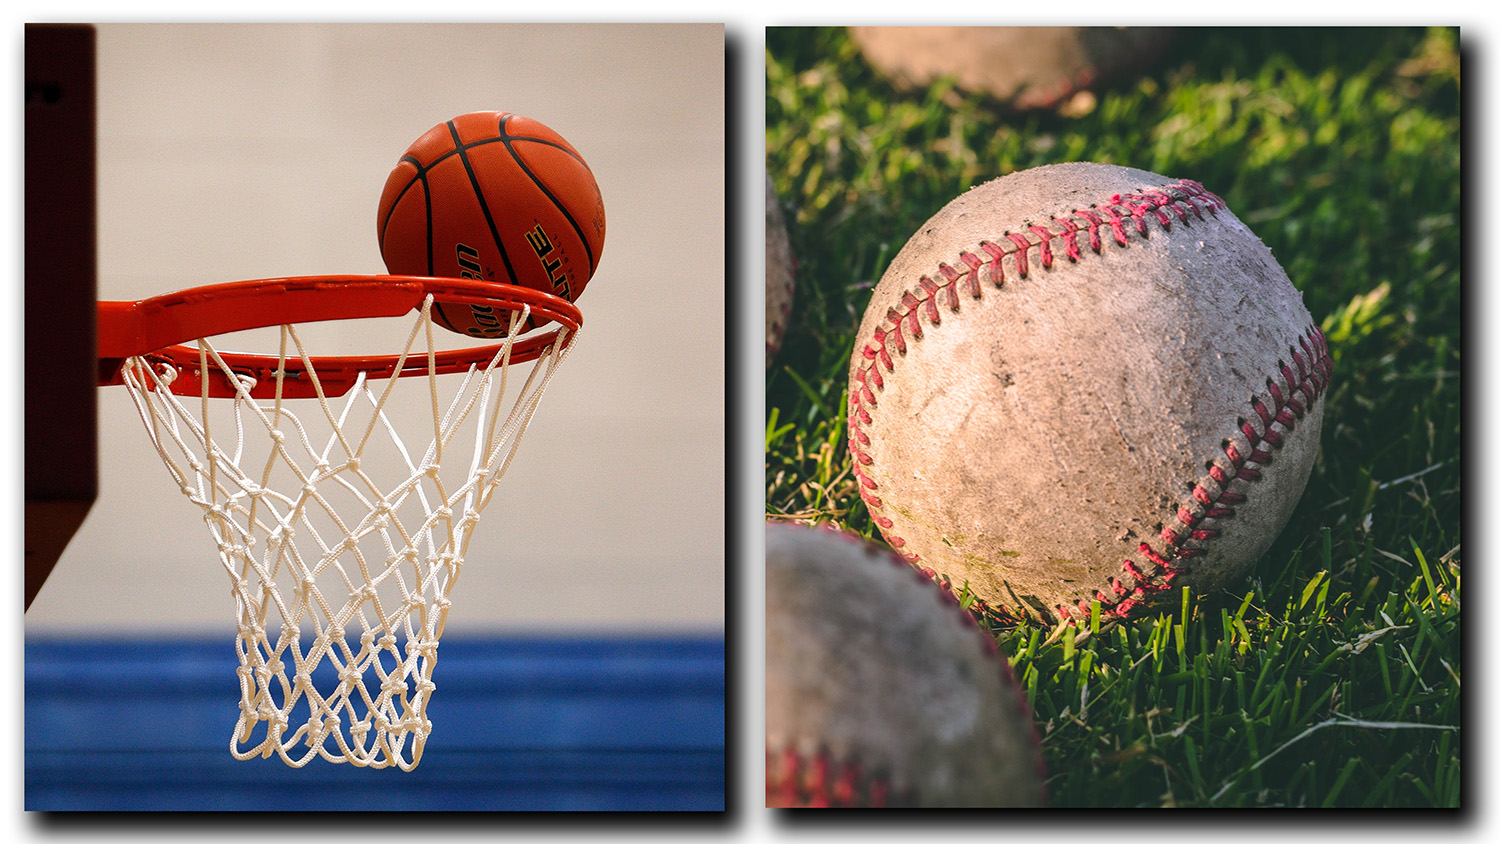 Registration Now Open for the Tamarac Basketball and Baseball Spring Leagues